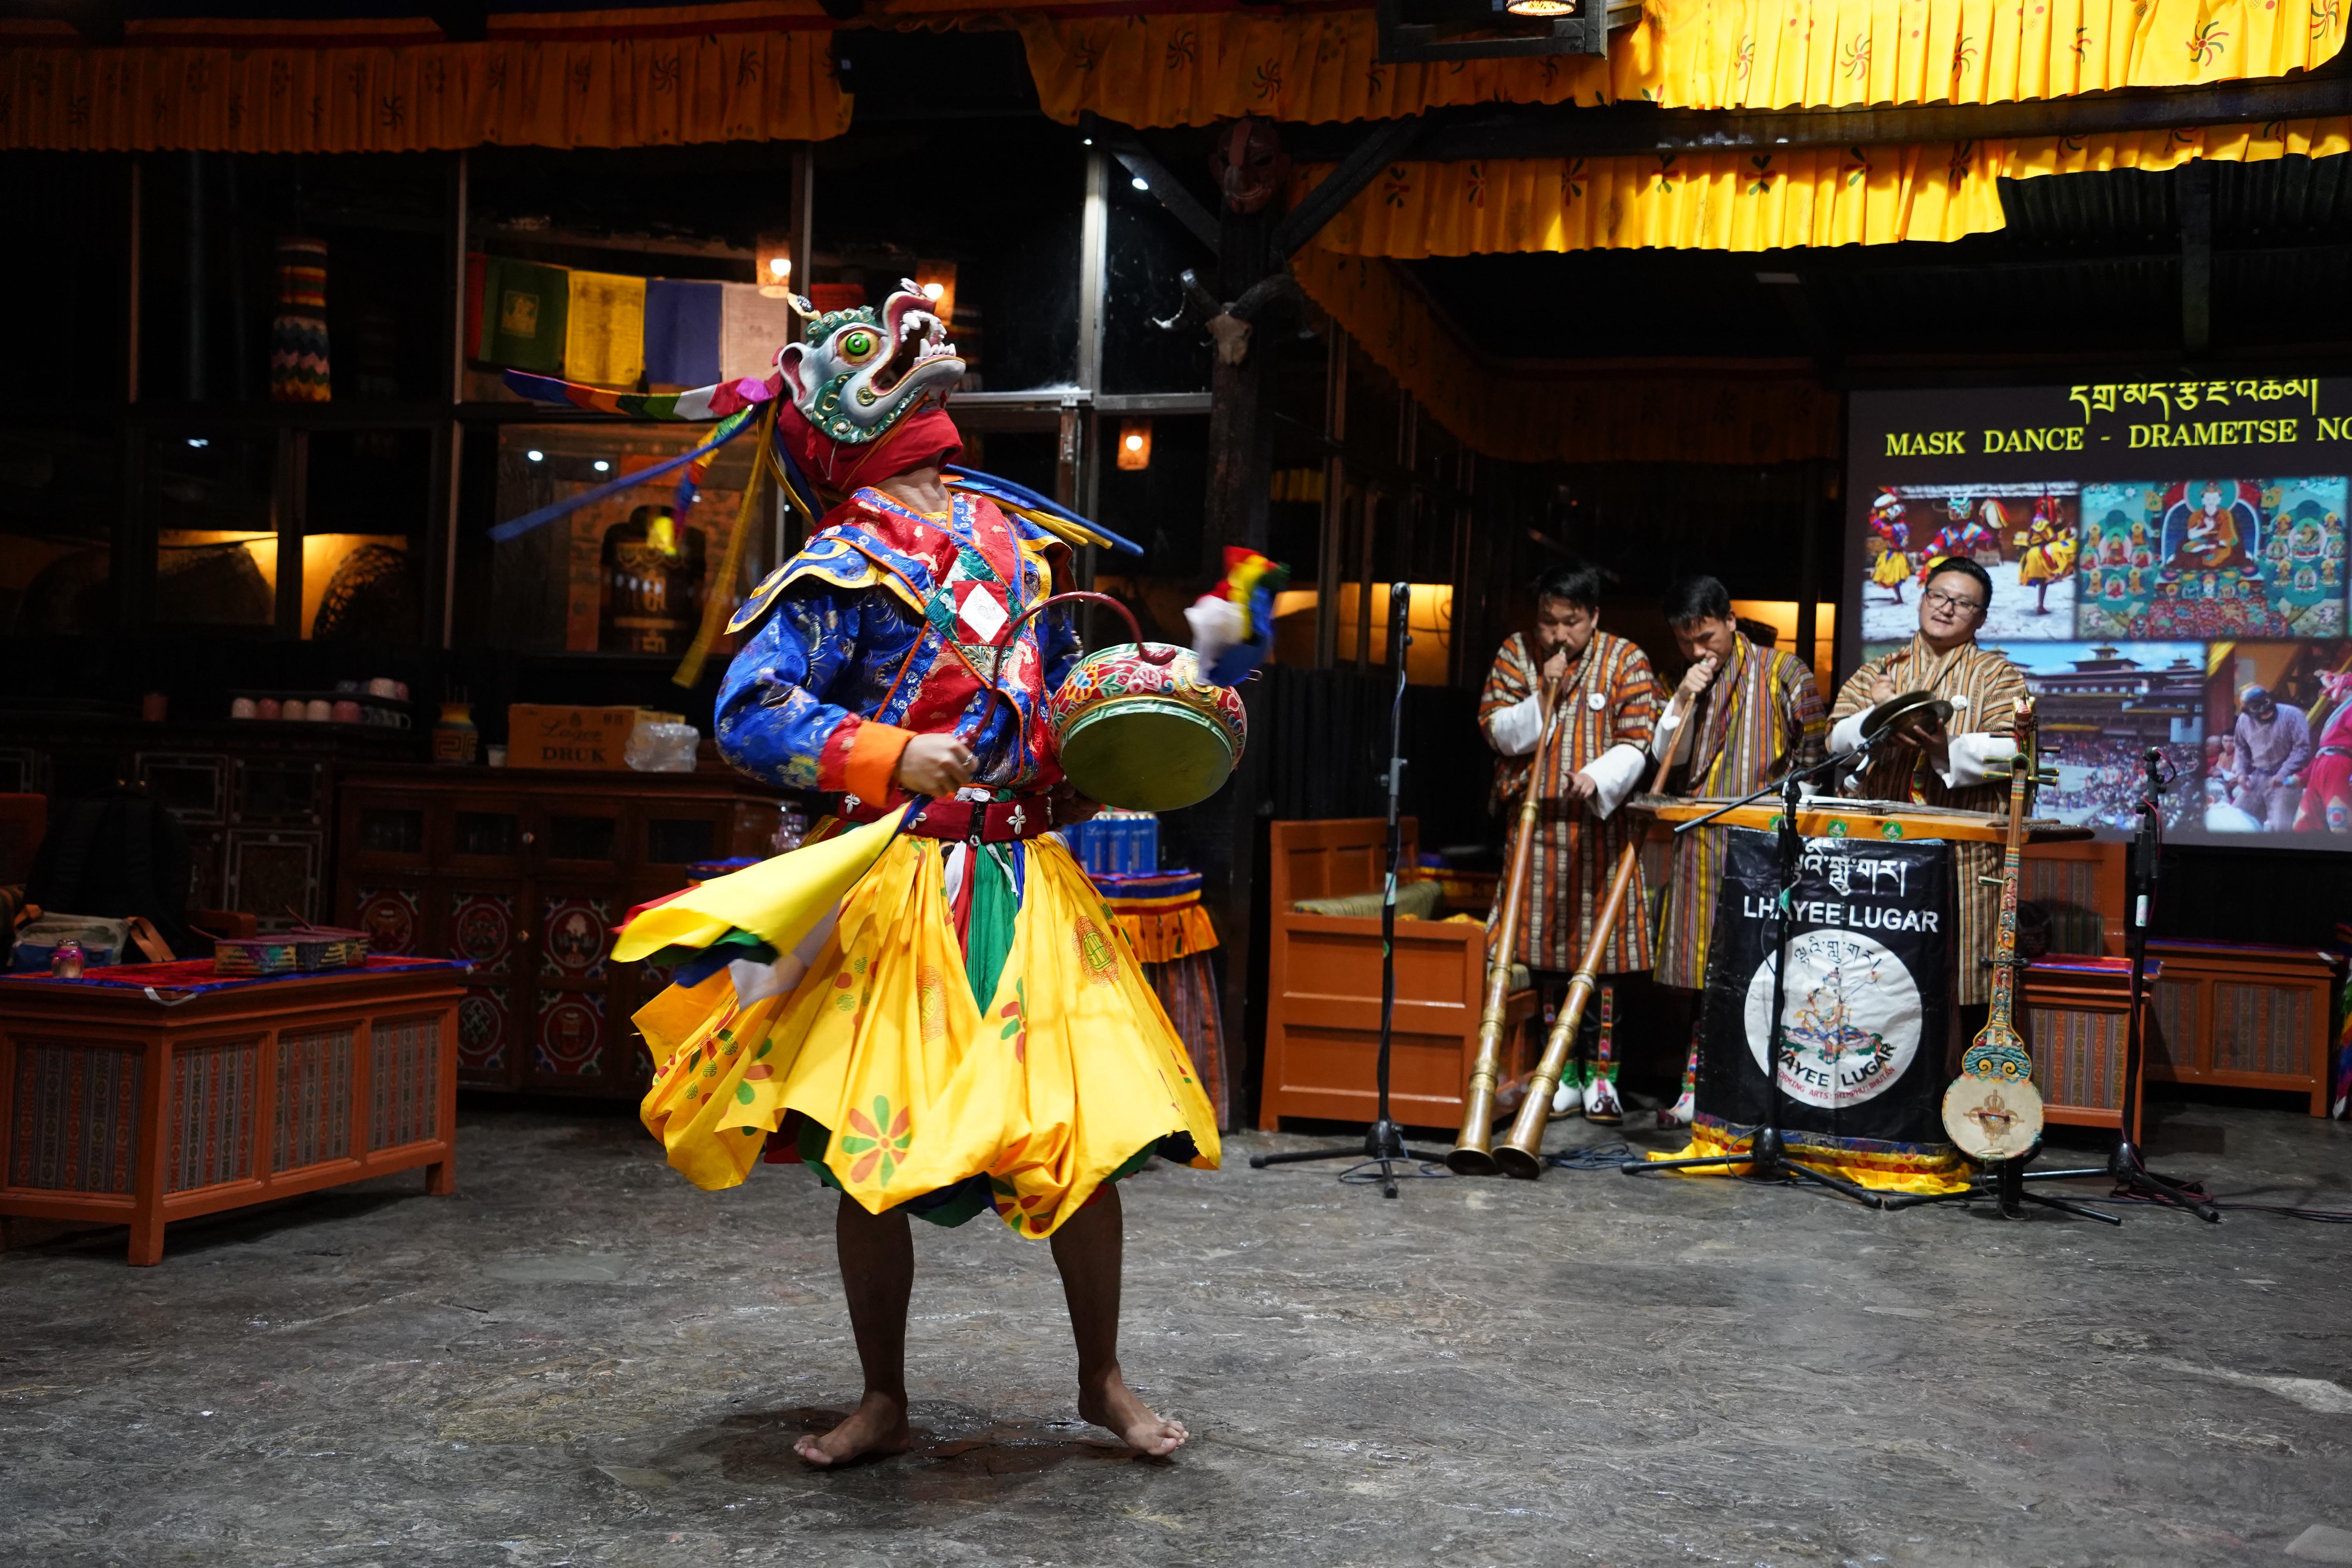 A traditional Mask Dance being performed in Bhutan.